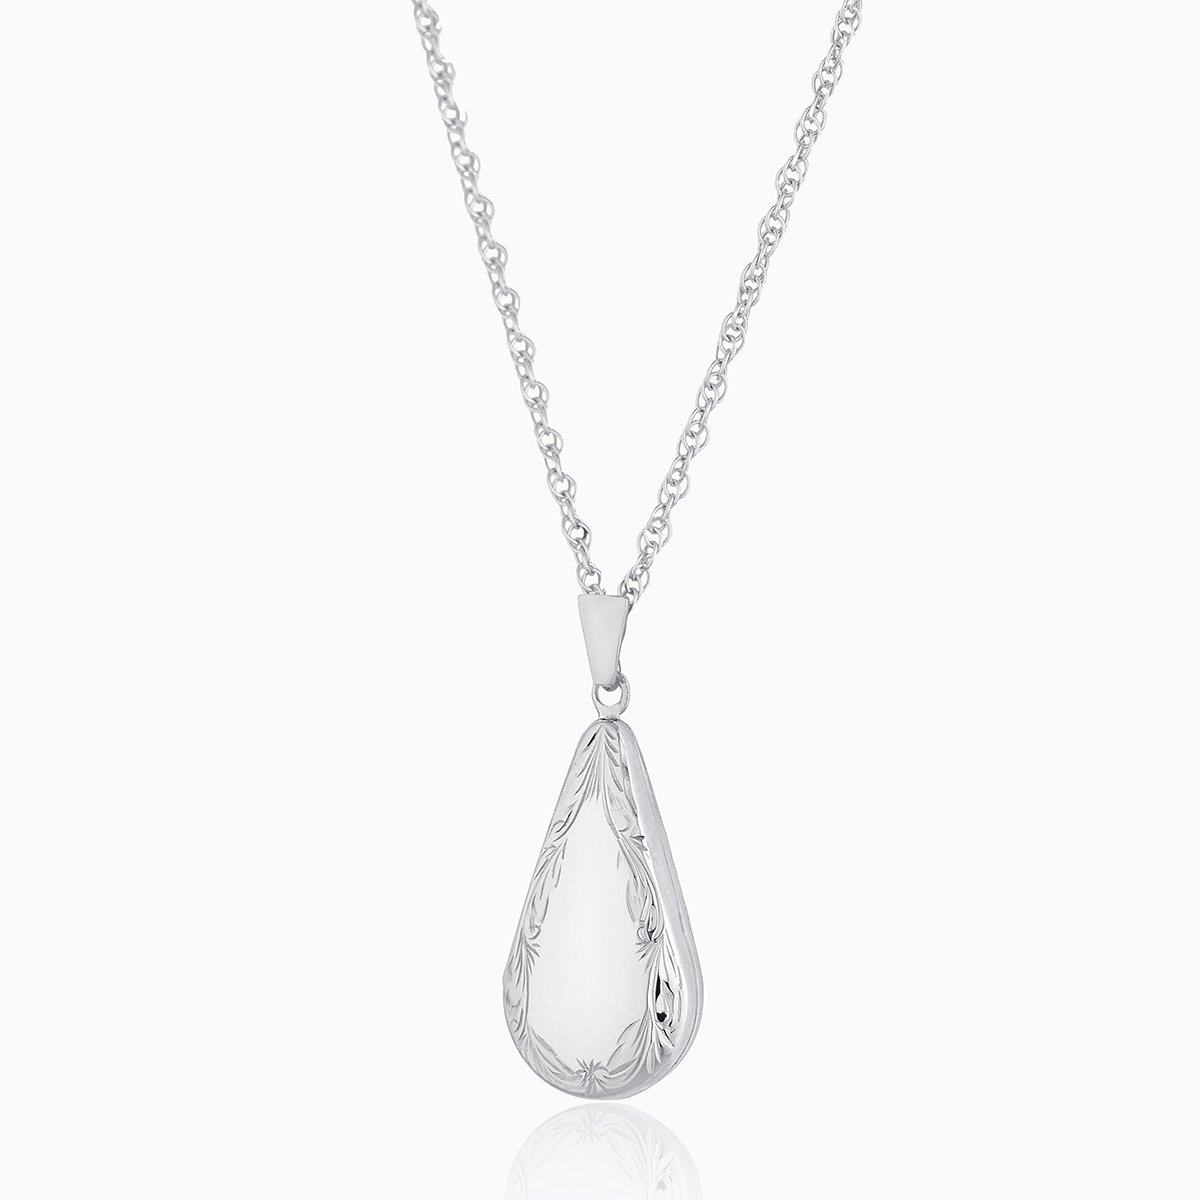 9 ct white gold teardrop shaped locket with an engraved border on a 9 ct white gold chain